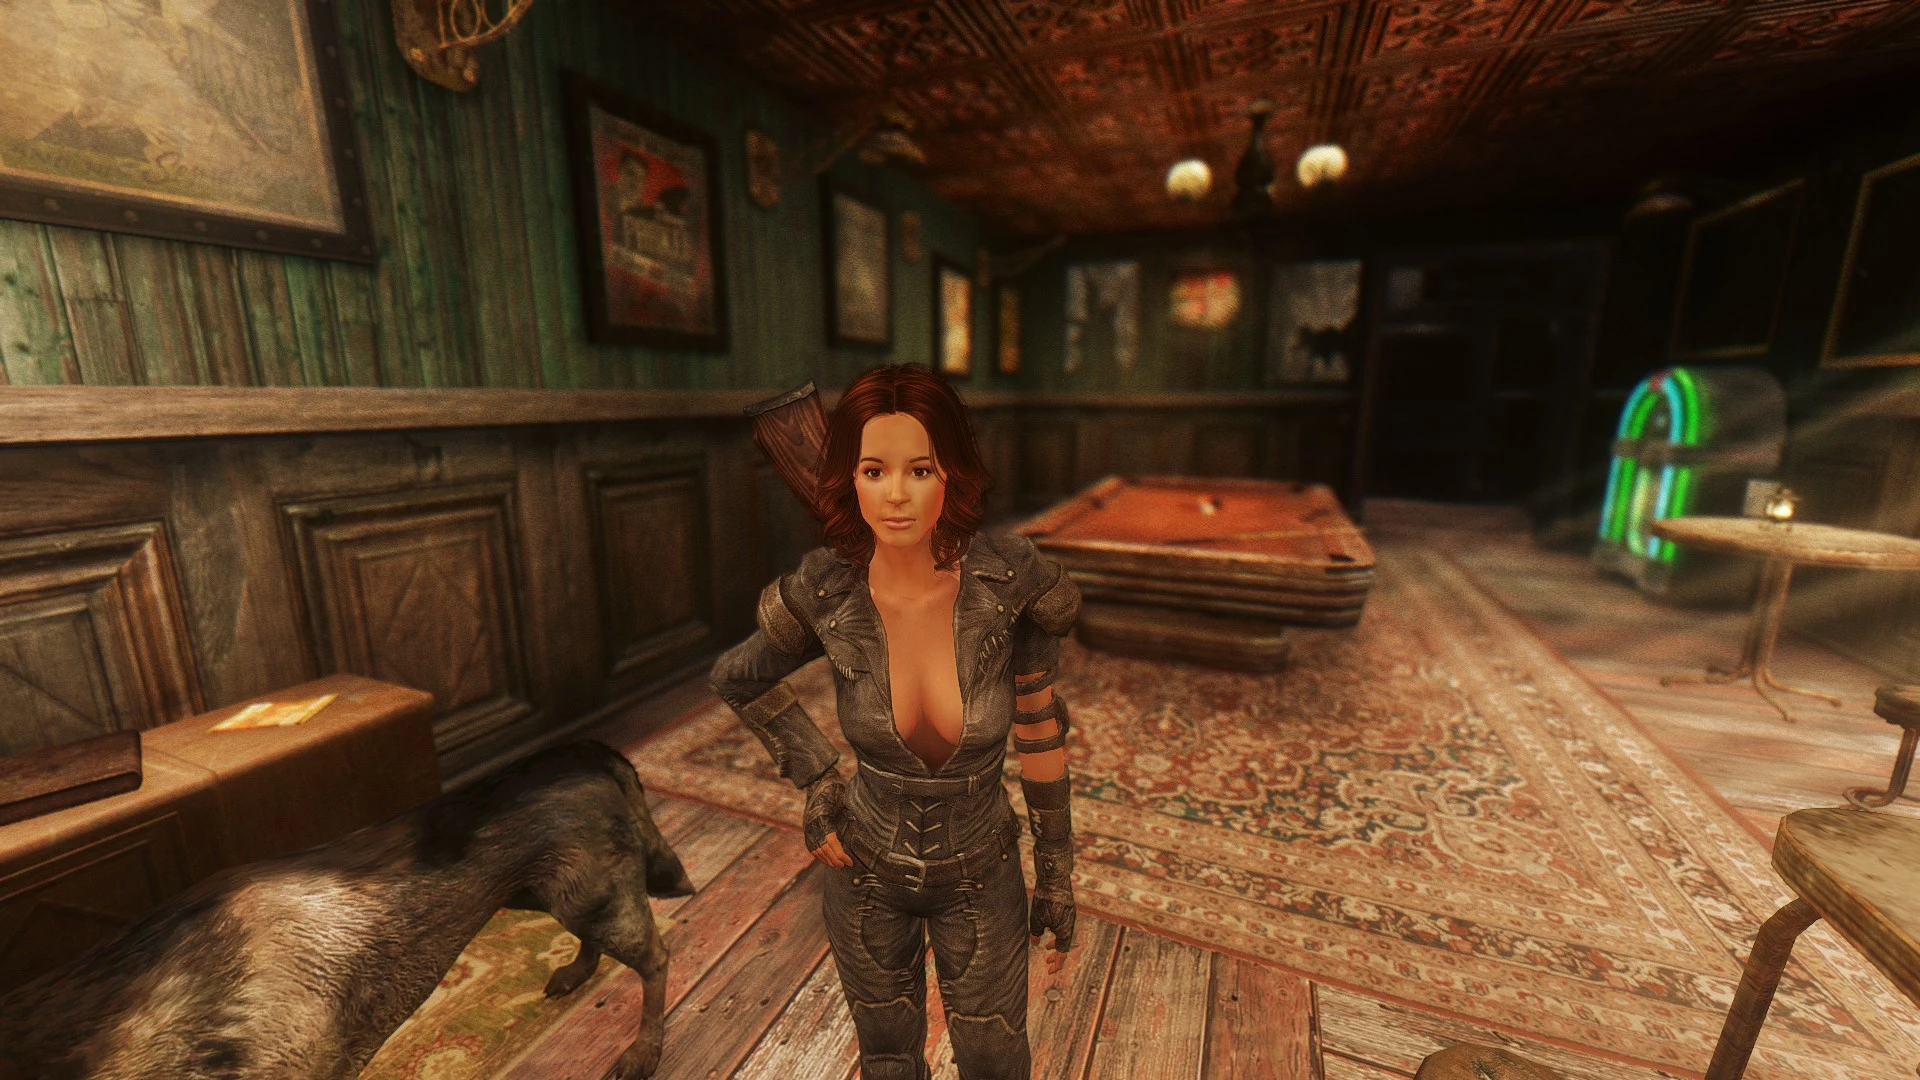 How To Install Fallout New Vegas Character Overhaul Dolphindas